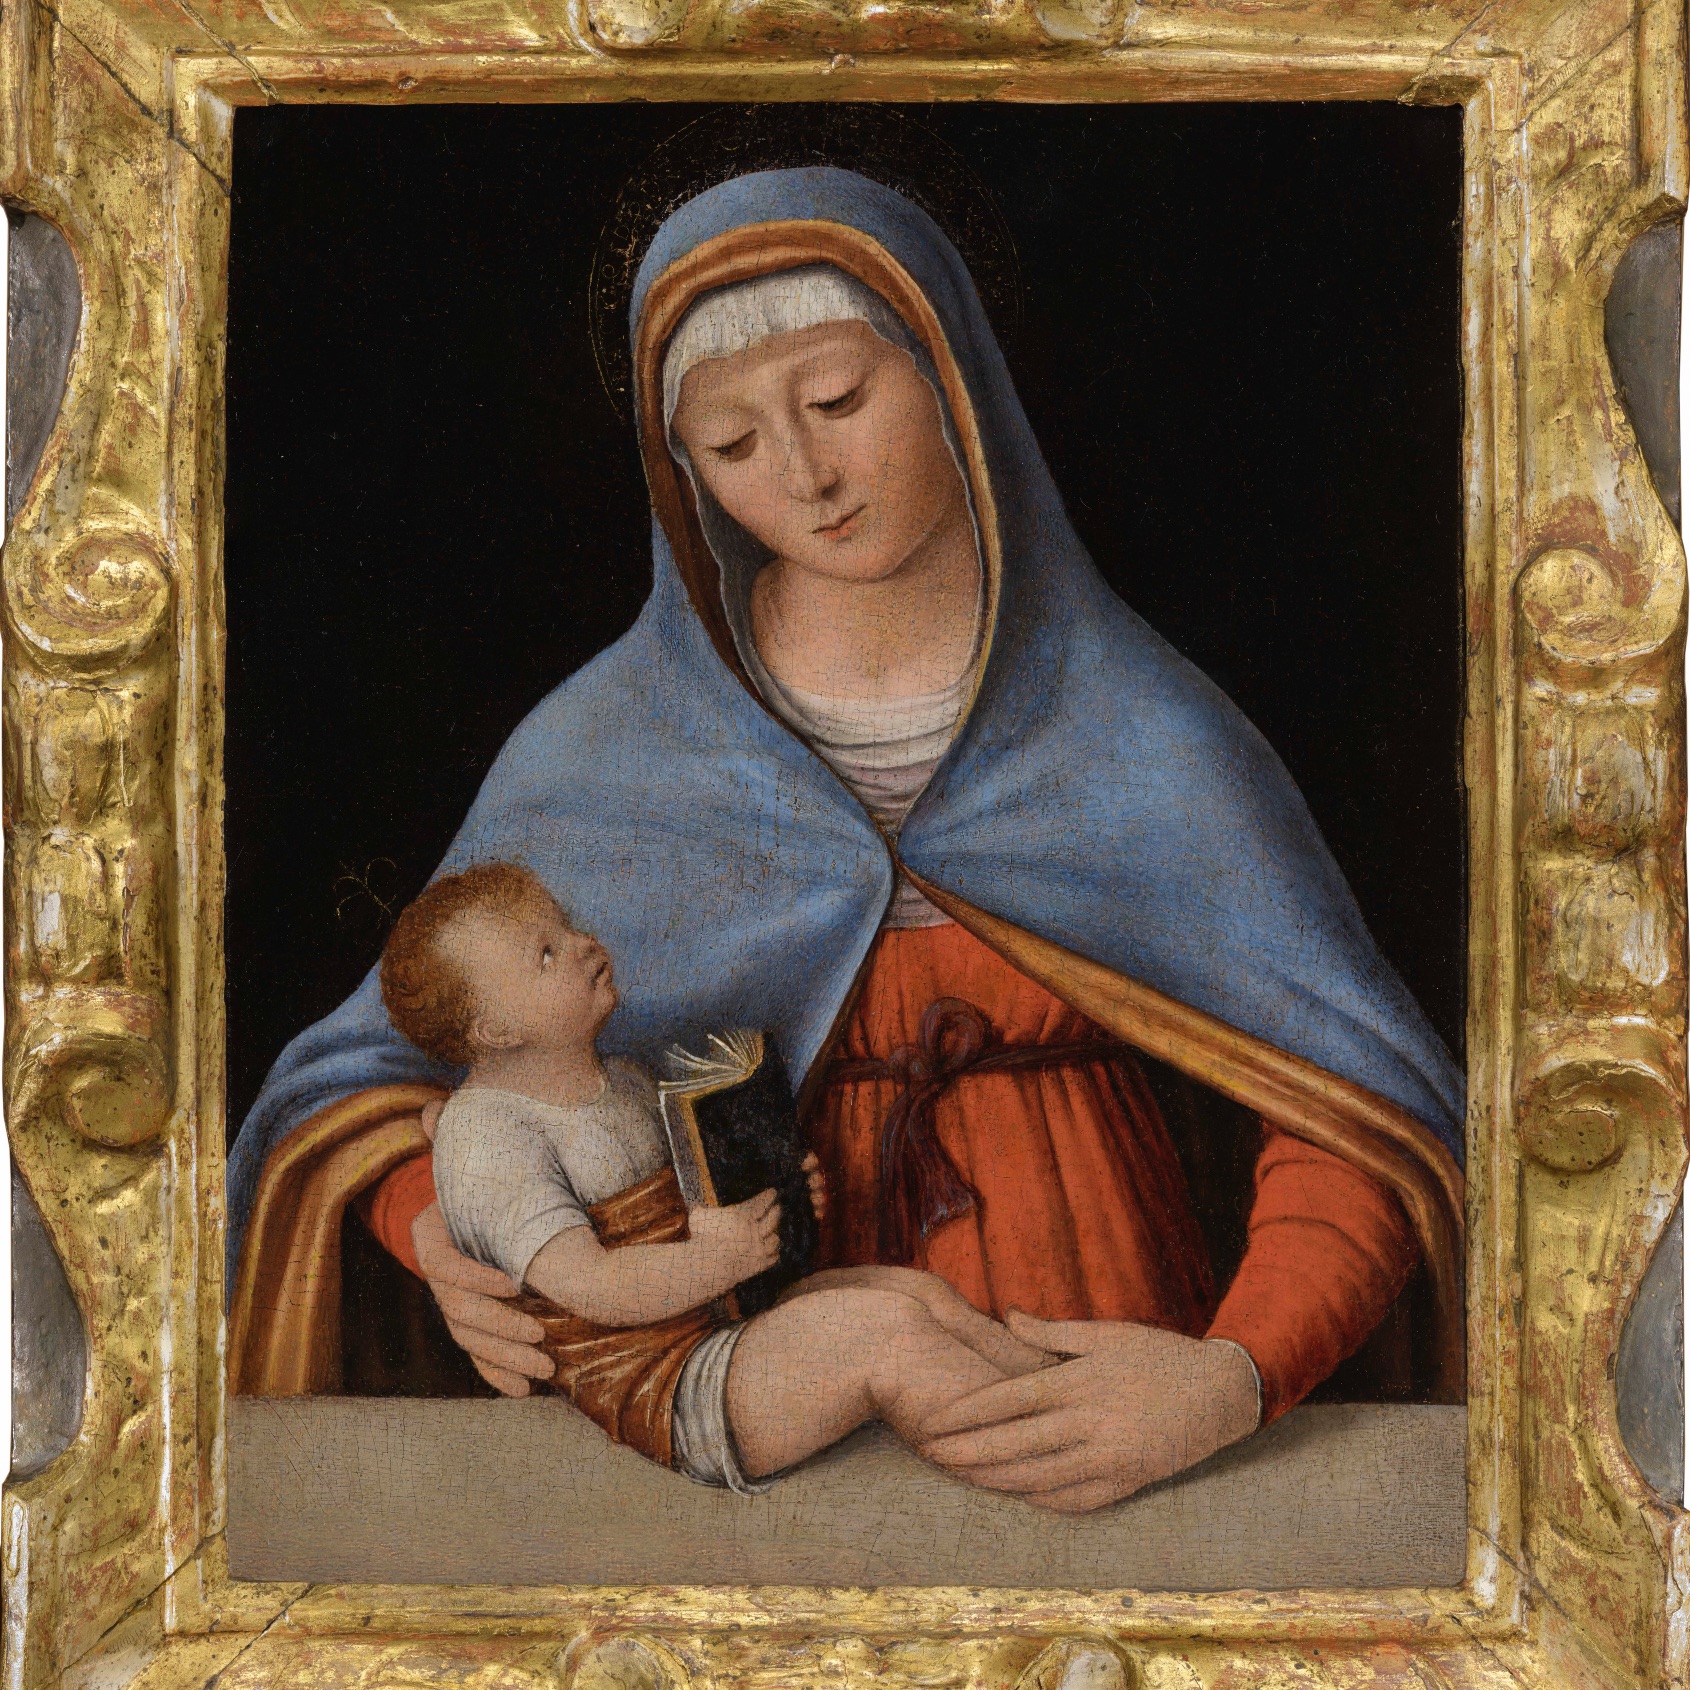 The recovery of the “Madonna and Child reading”  by Andrea Solario